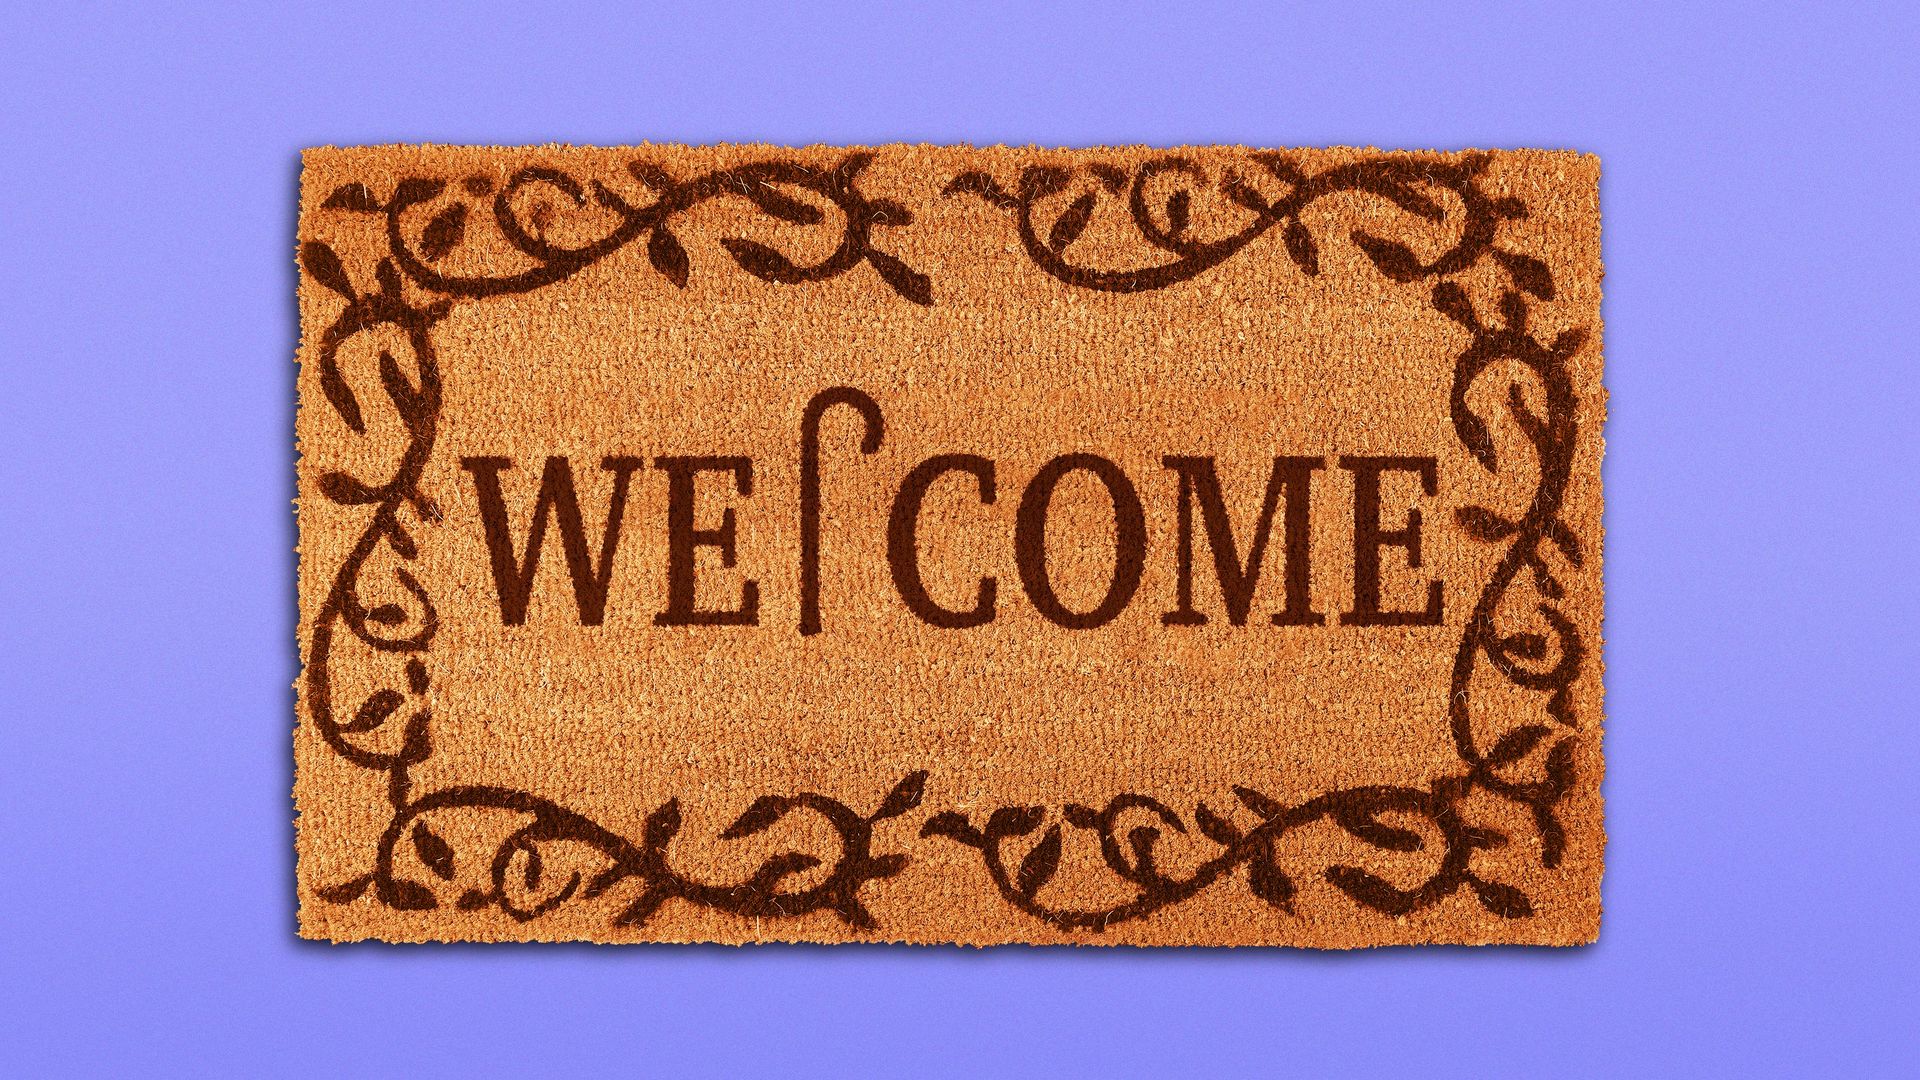 Illustration of a door mat that says "Welcome," but the L is a cane.